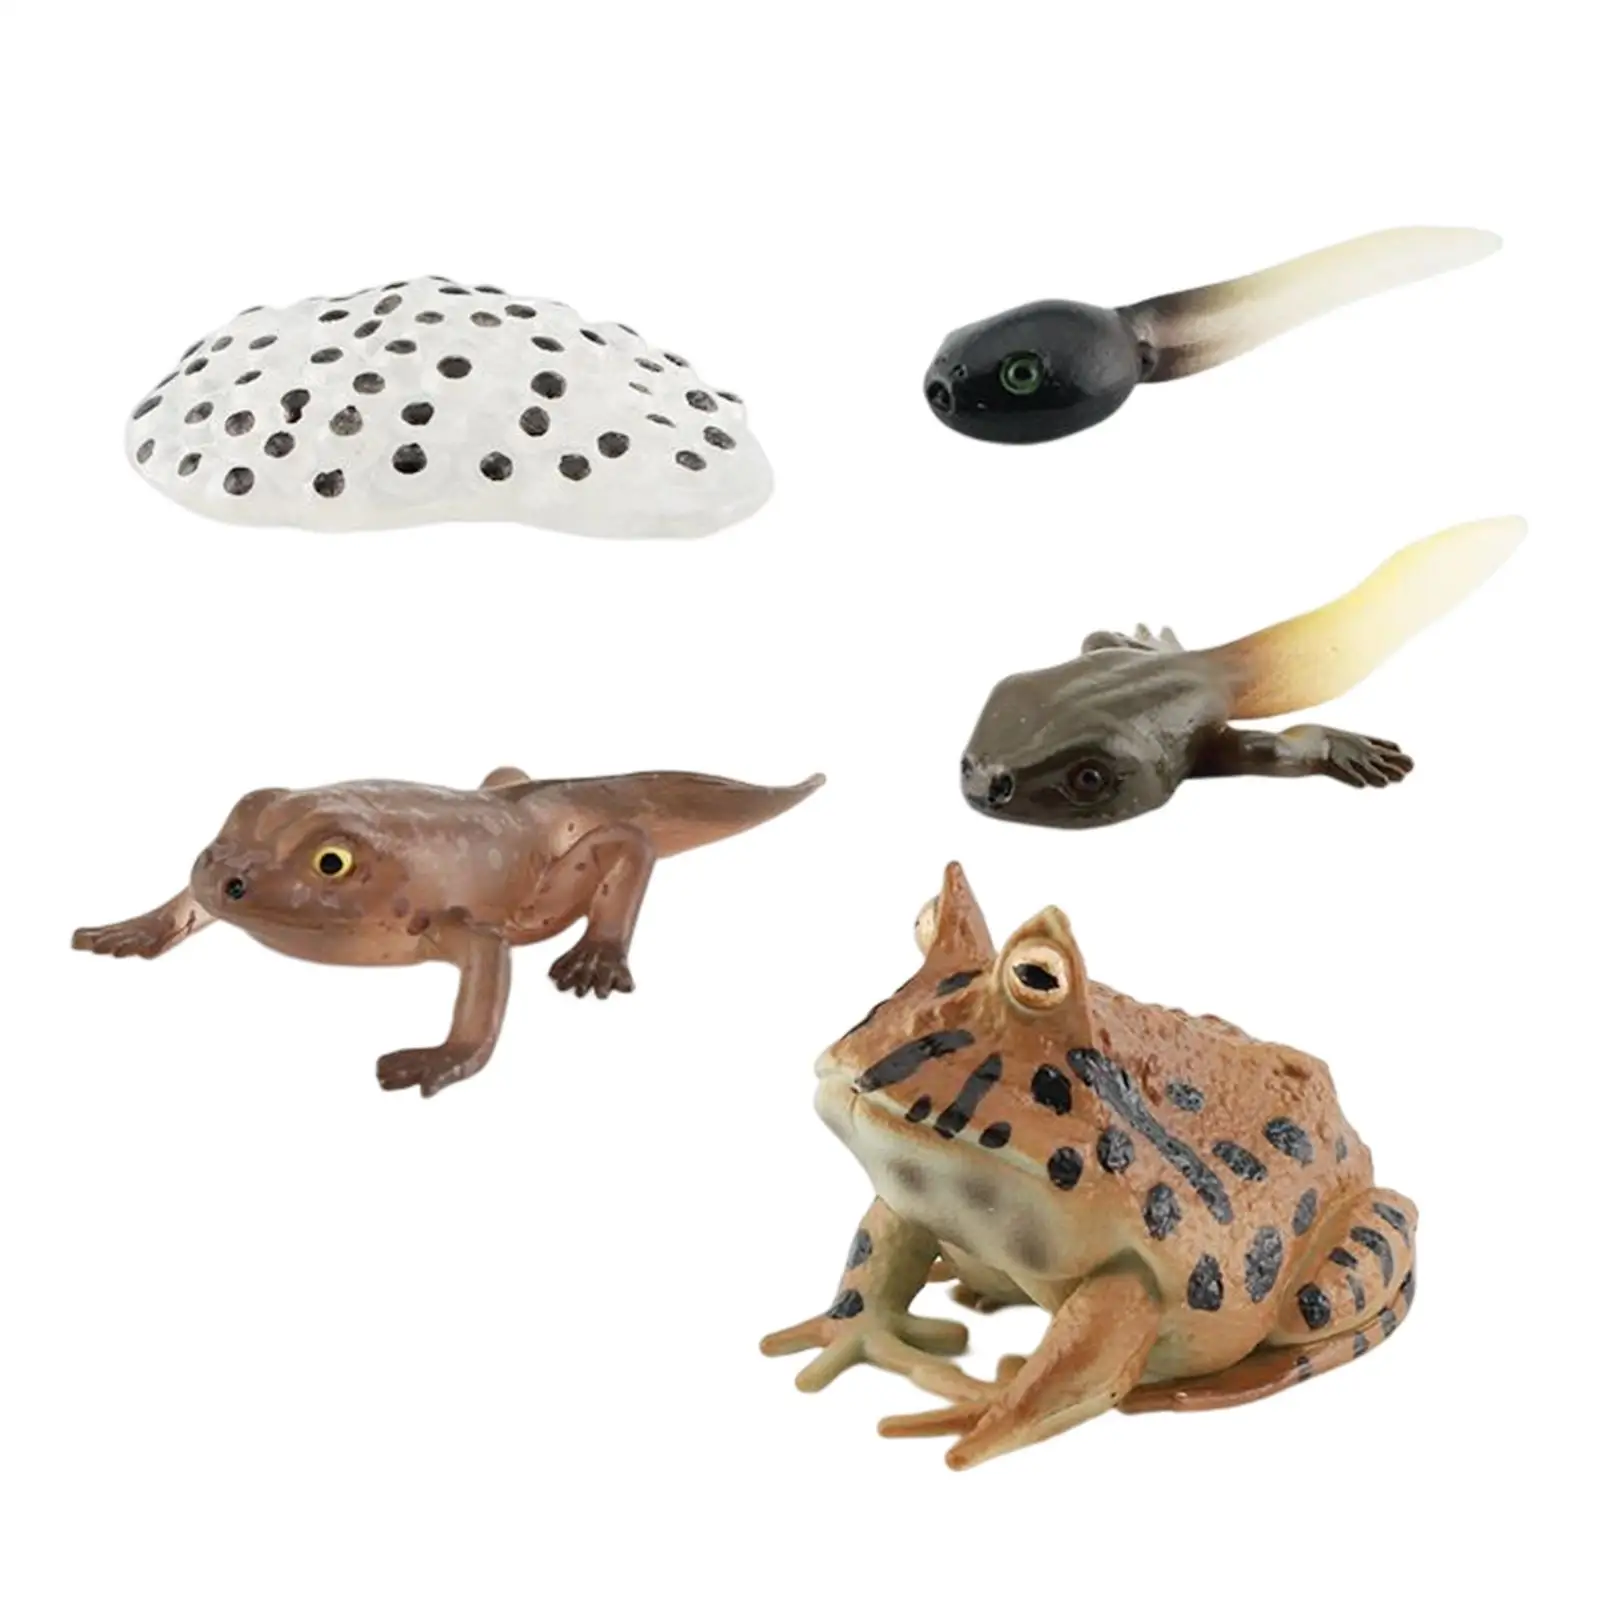 Life Cycle Figurines Realistic Animal Figurines Learning Prop Frogs Life Cycle Model for Toddlers Kids Project Development Toys